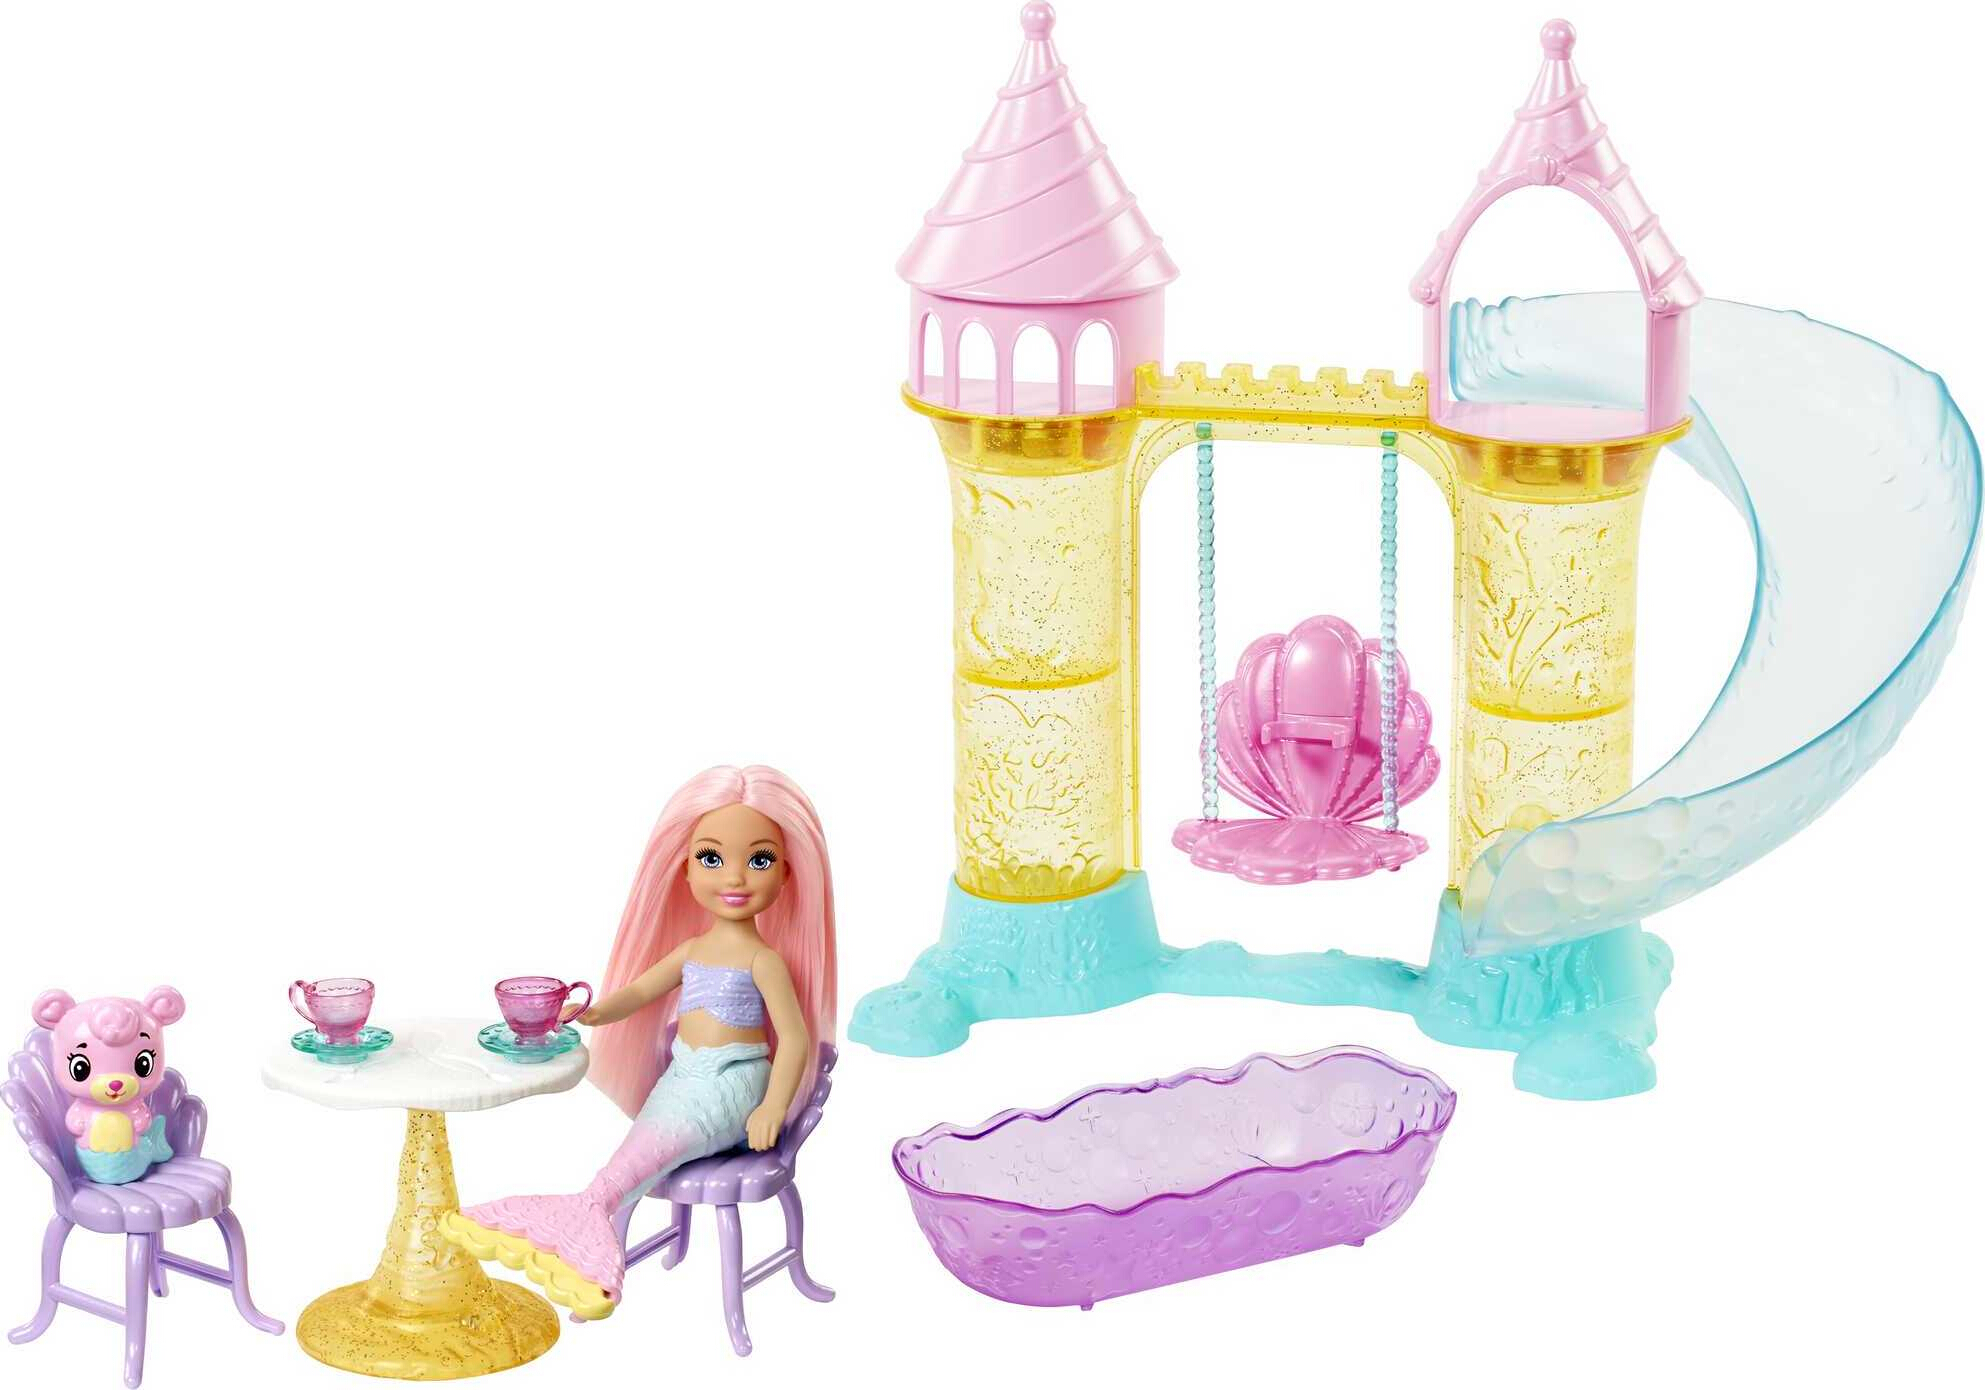 Barbie Chelsea Mermaid Doll & Playset with Accessories - image 1 of 7